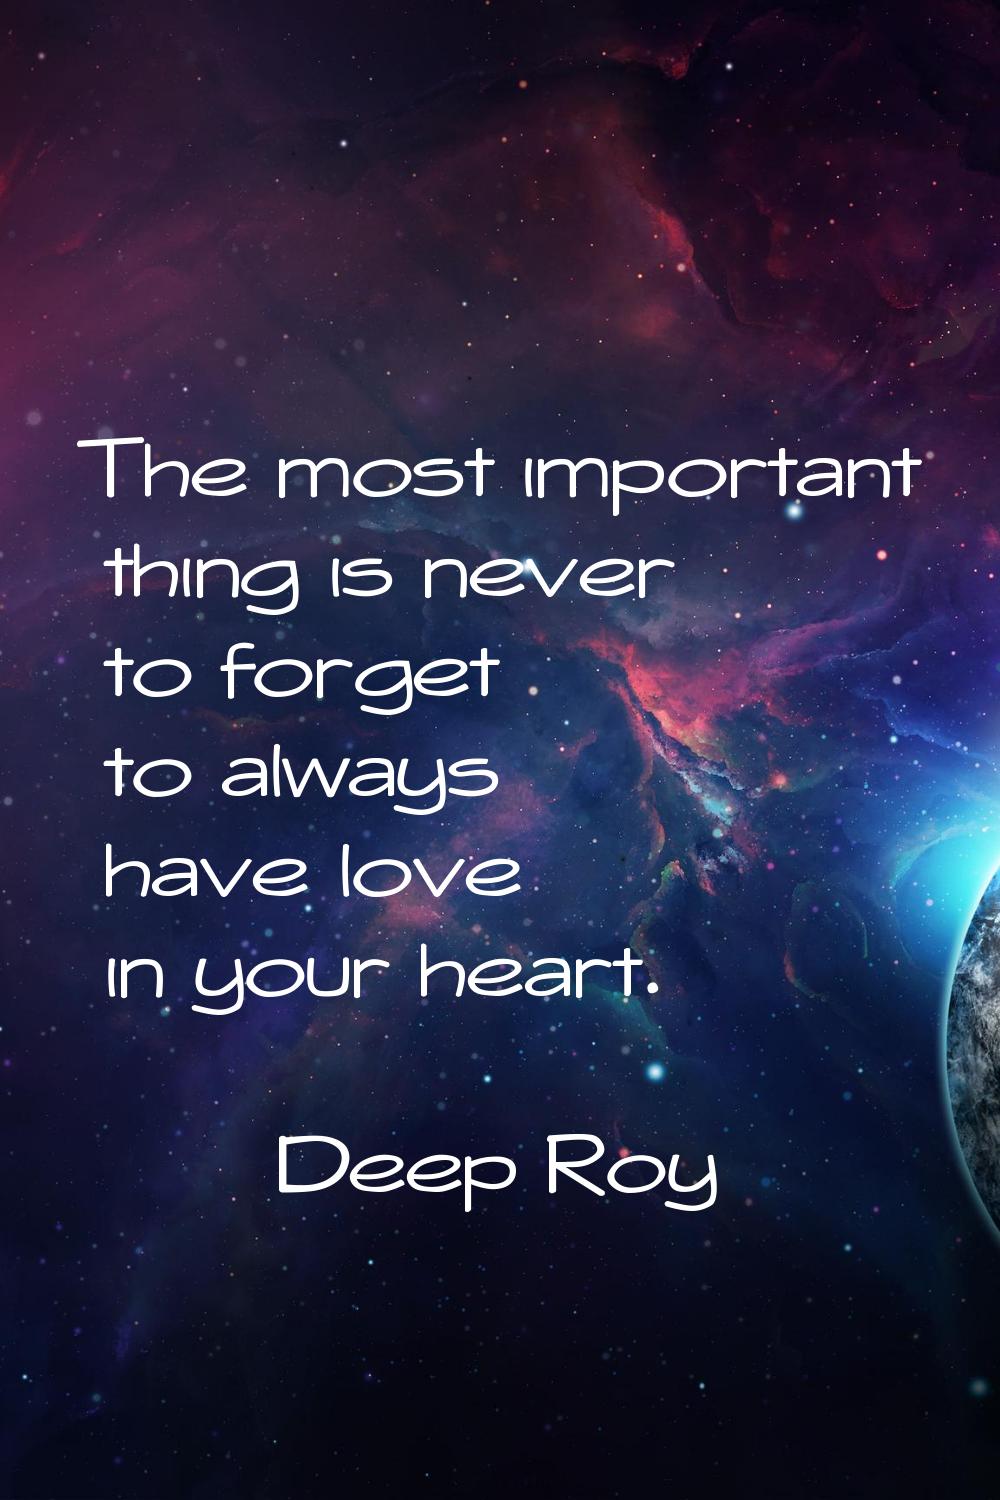 The most important thing is never to forget to always have love in your heart.